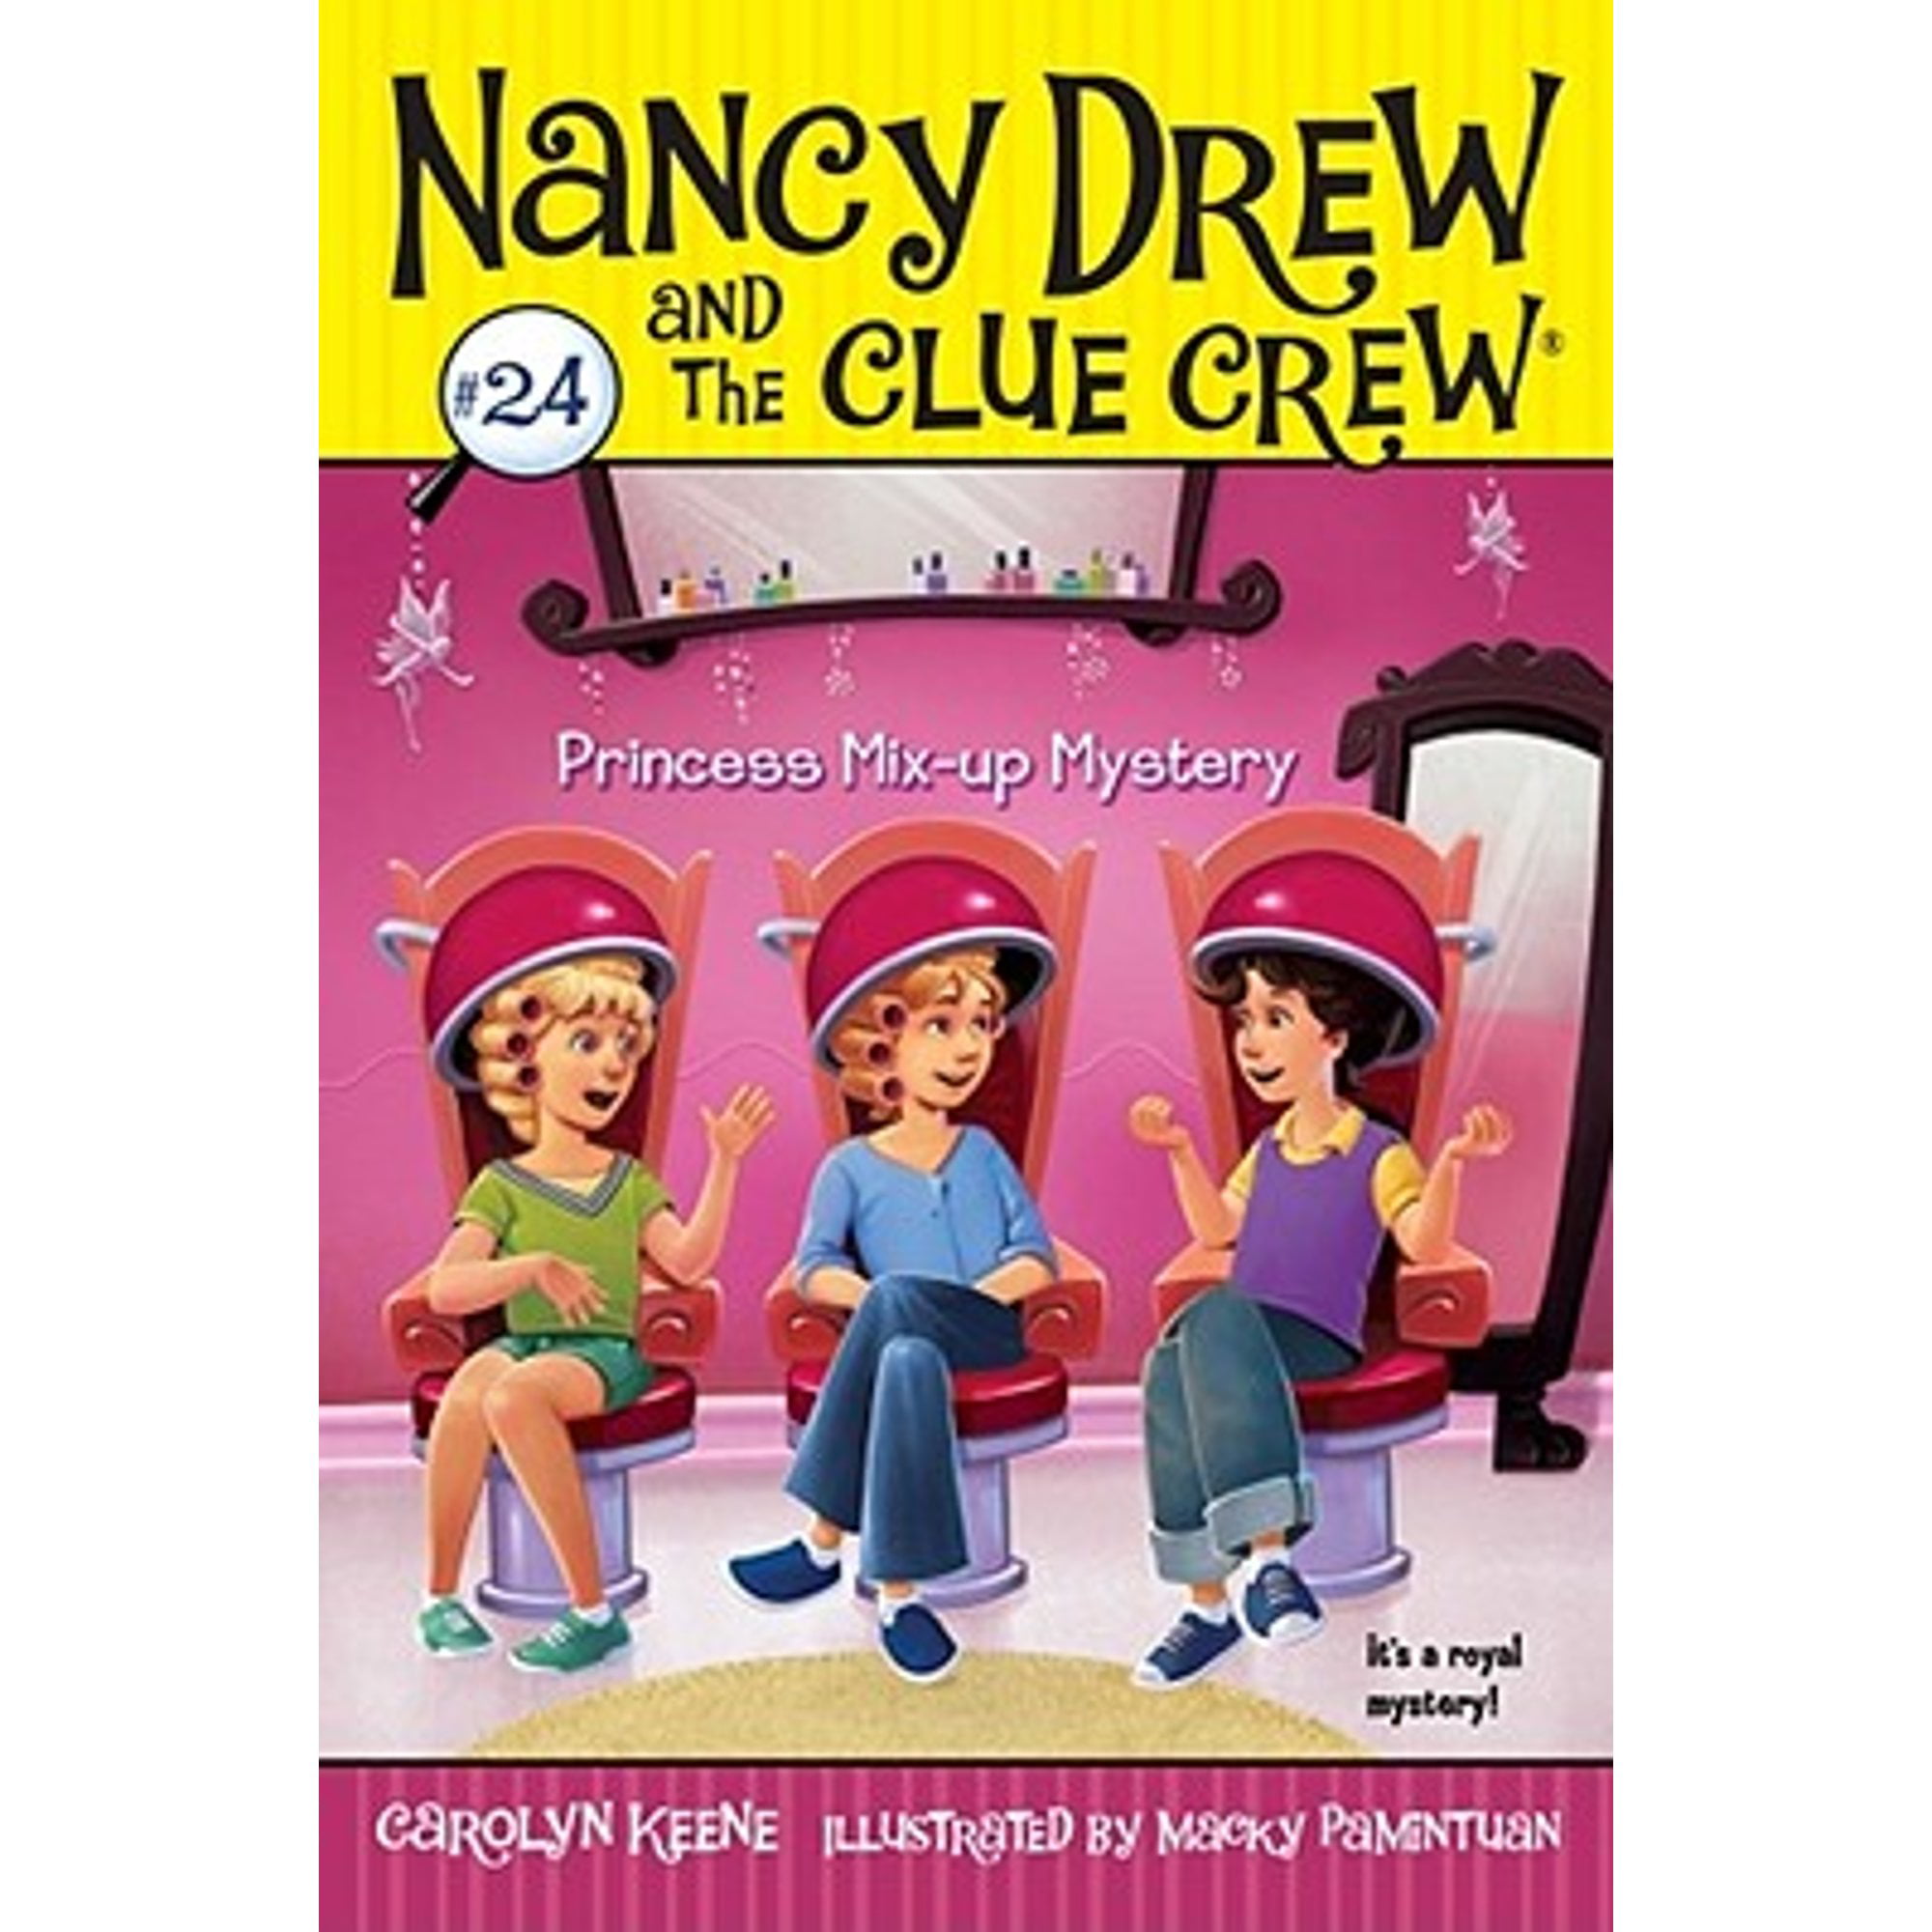 Pre-Owned Princess Mix-up Mystery Nancy Drew and the Clue Crew, No. 24 Paperback Carolyn Keene